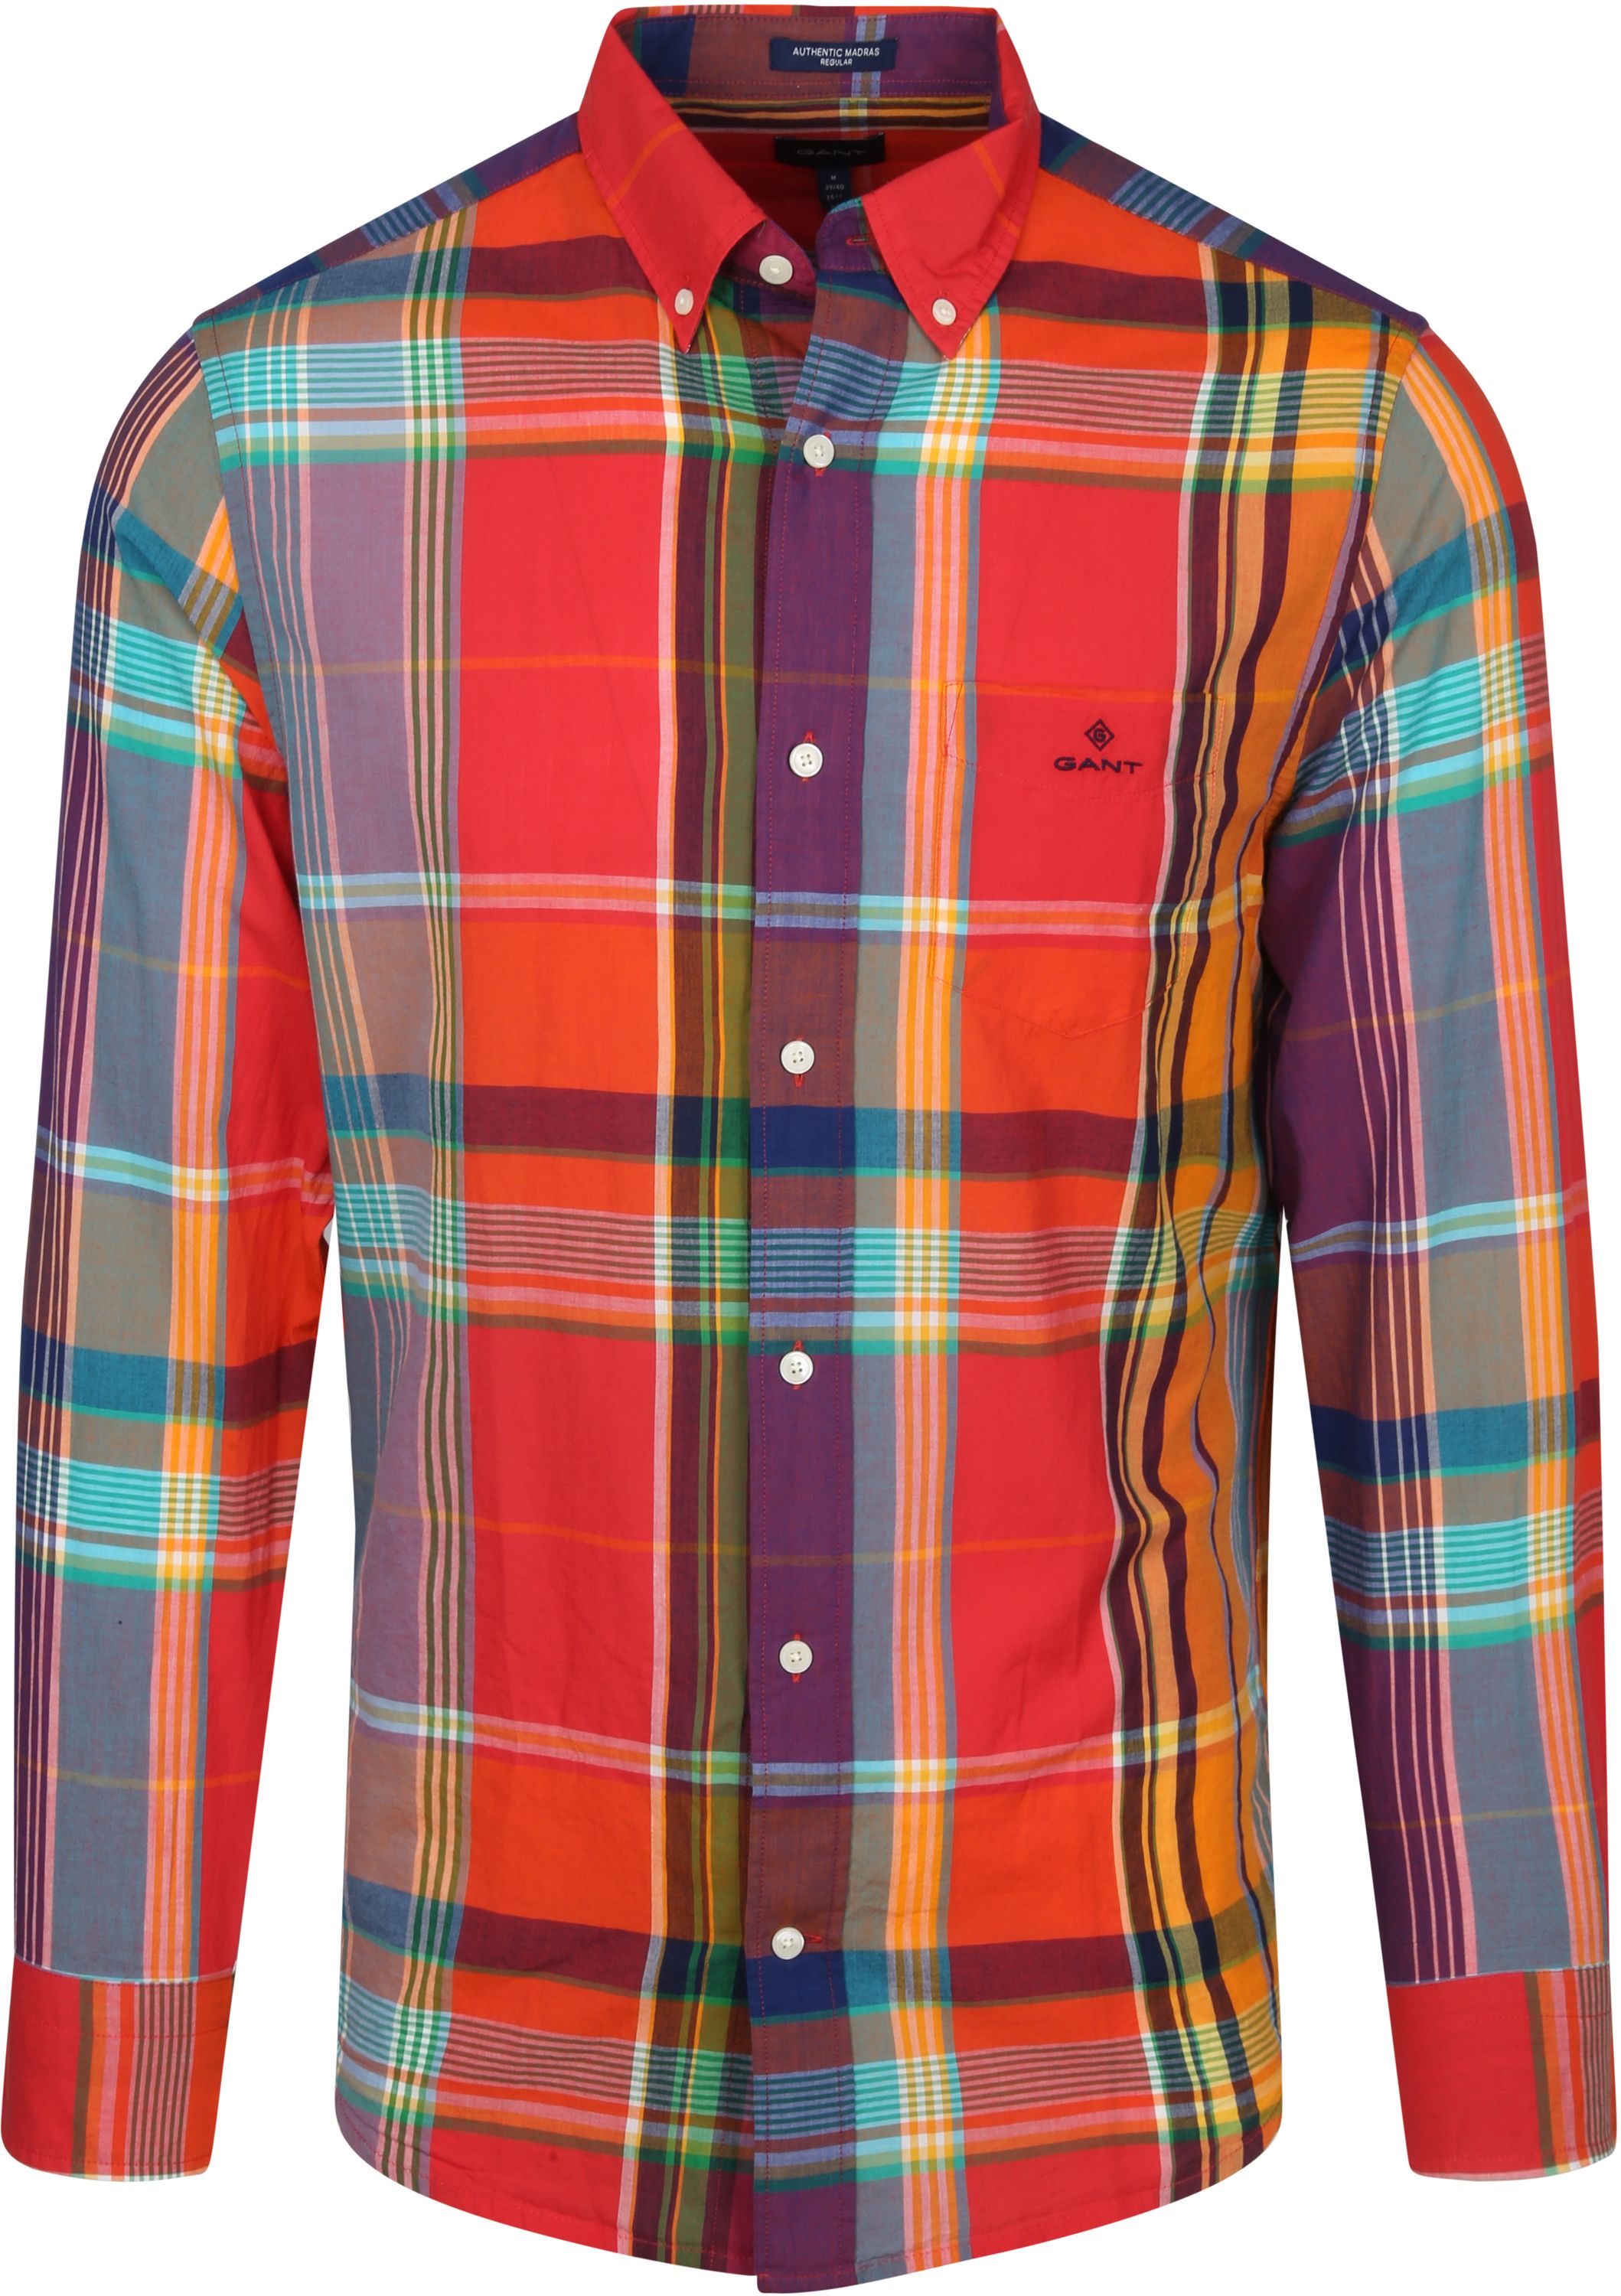 Gant Gingham Shirt Check Multicolour Red size 3XL